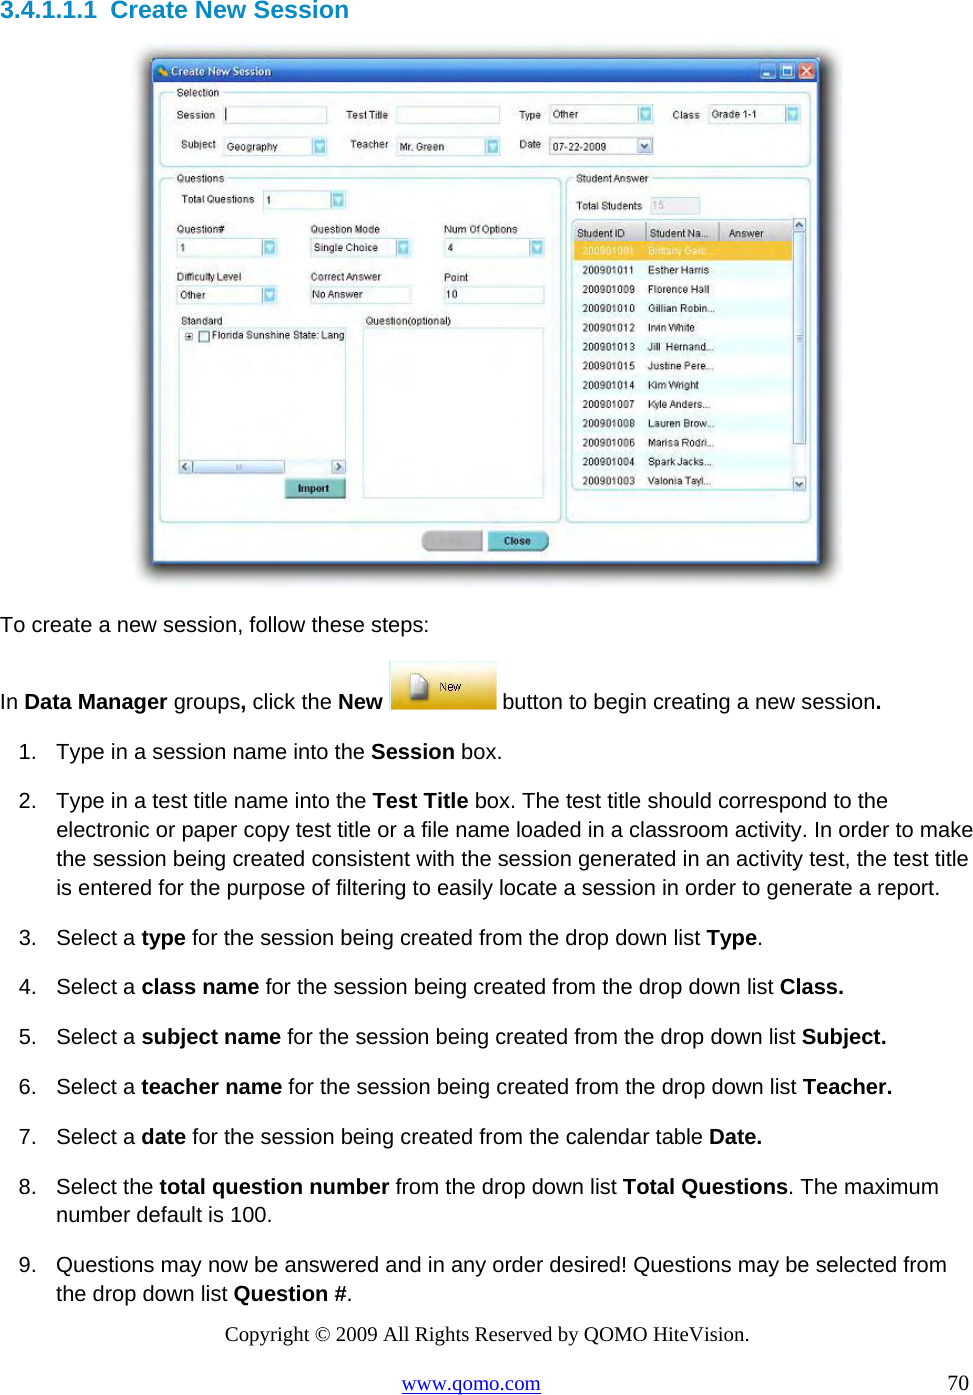 Copyright © 2009 All Rights Reserved by QOMO HiteVision. www.qomo.com                                                                          70  3.4.1.1.1  Create New Session  To create a new session, follow these steps: In Data Manager groups, click the New   button to begin creating a new session.  1.  Type in a session name into the Session box. 2.  Type in a test title name into the Test Title box. The test title should correspond to the electronic or paper copy test title or a file name loaded in a classroom activity. In order to make the session being created consistent with the session generated in an activity test, the test title is entered for the purpose of filtering to easily locate a session in order to generate a report. 3. Select a type for the session being created from the drop down list Type. 4. Select a class name for the session being created from the drop down list Class. 5. Select a subject name for the session being created from the drop down list Subject. 6. Select a teacher name for the session being created from the drop down list Teacher. 7. Select a date for the session being created from the calendar table Date. 8. Select the total question number from the drop down list Total Questions. The maximum number default is 100. 9.  Questions may now be answered and in any order desired! Questions may be selected from the drop down list Question #. 